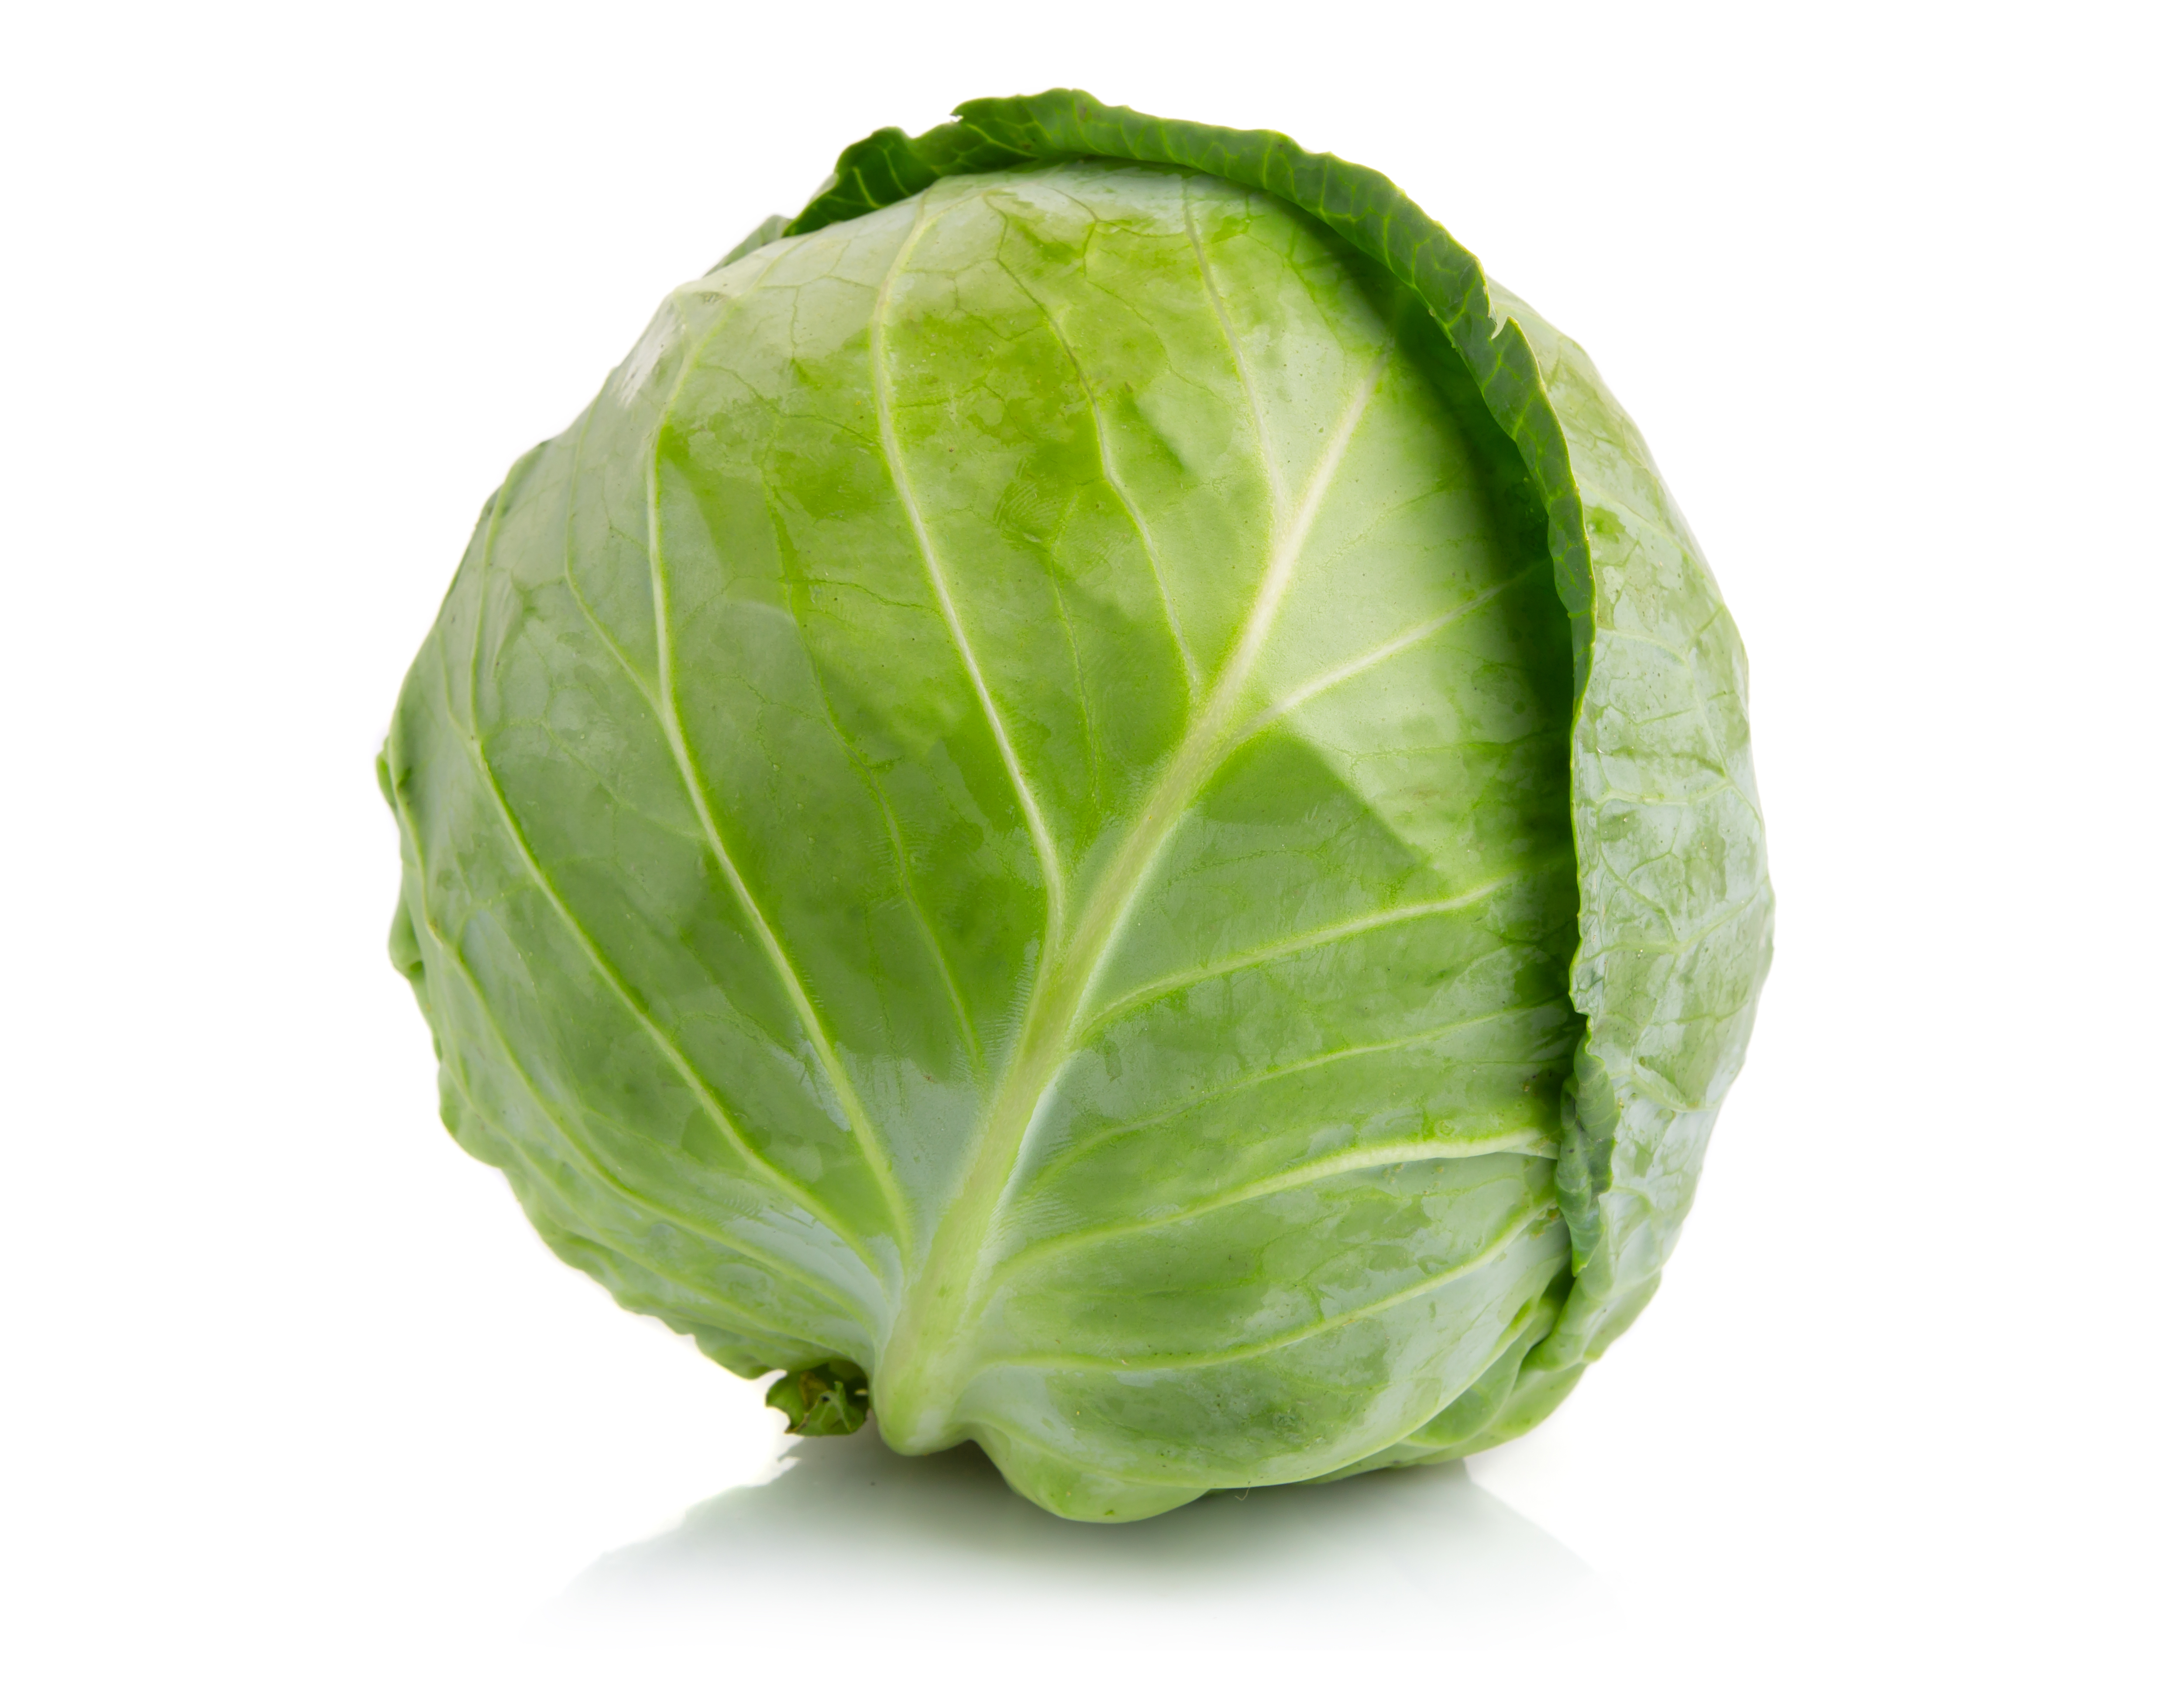 image of a cabbage